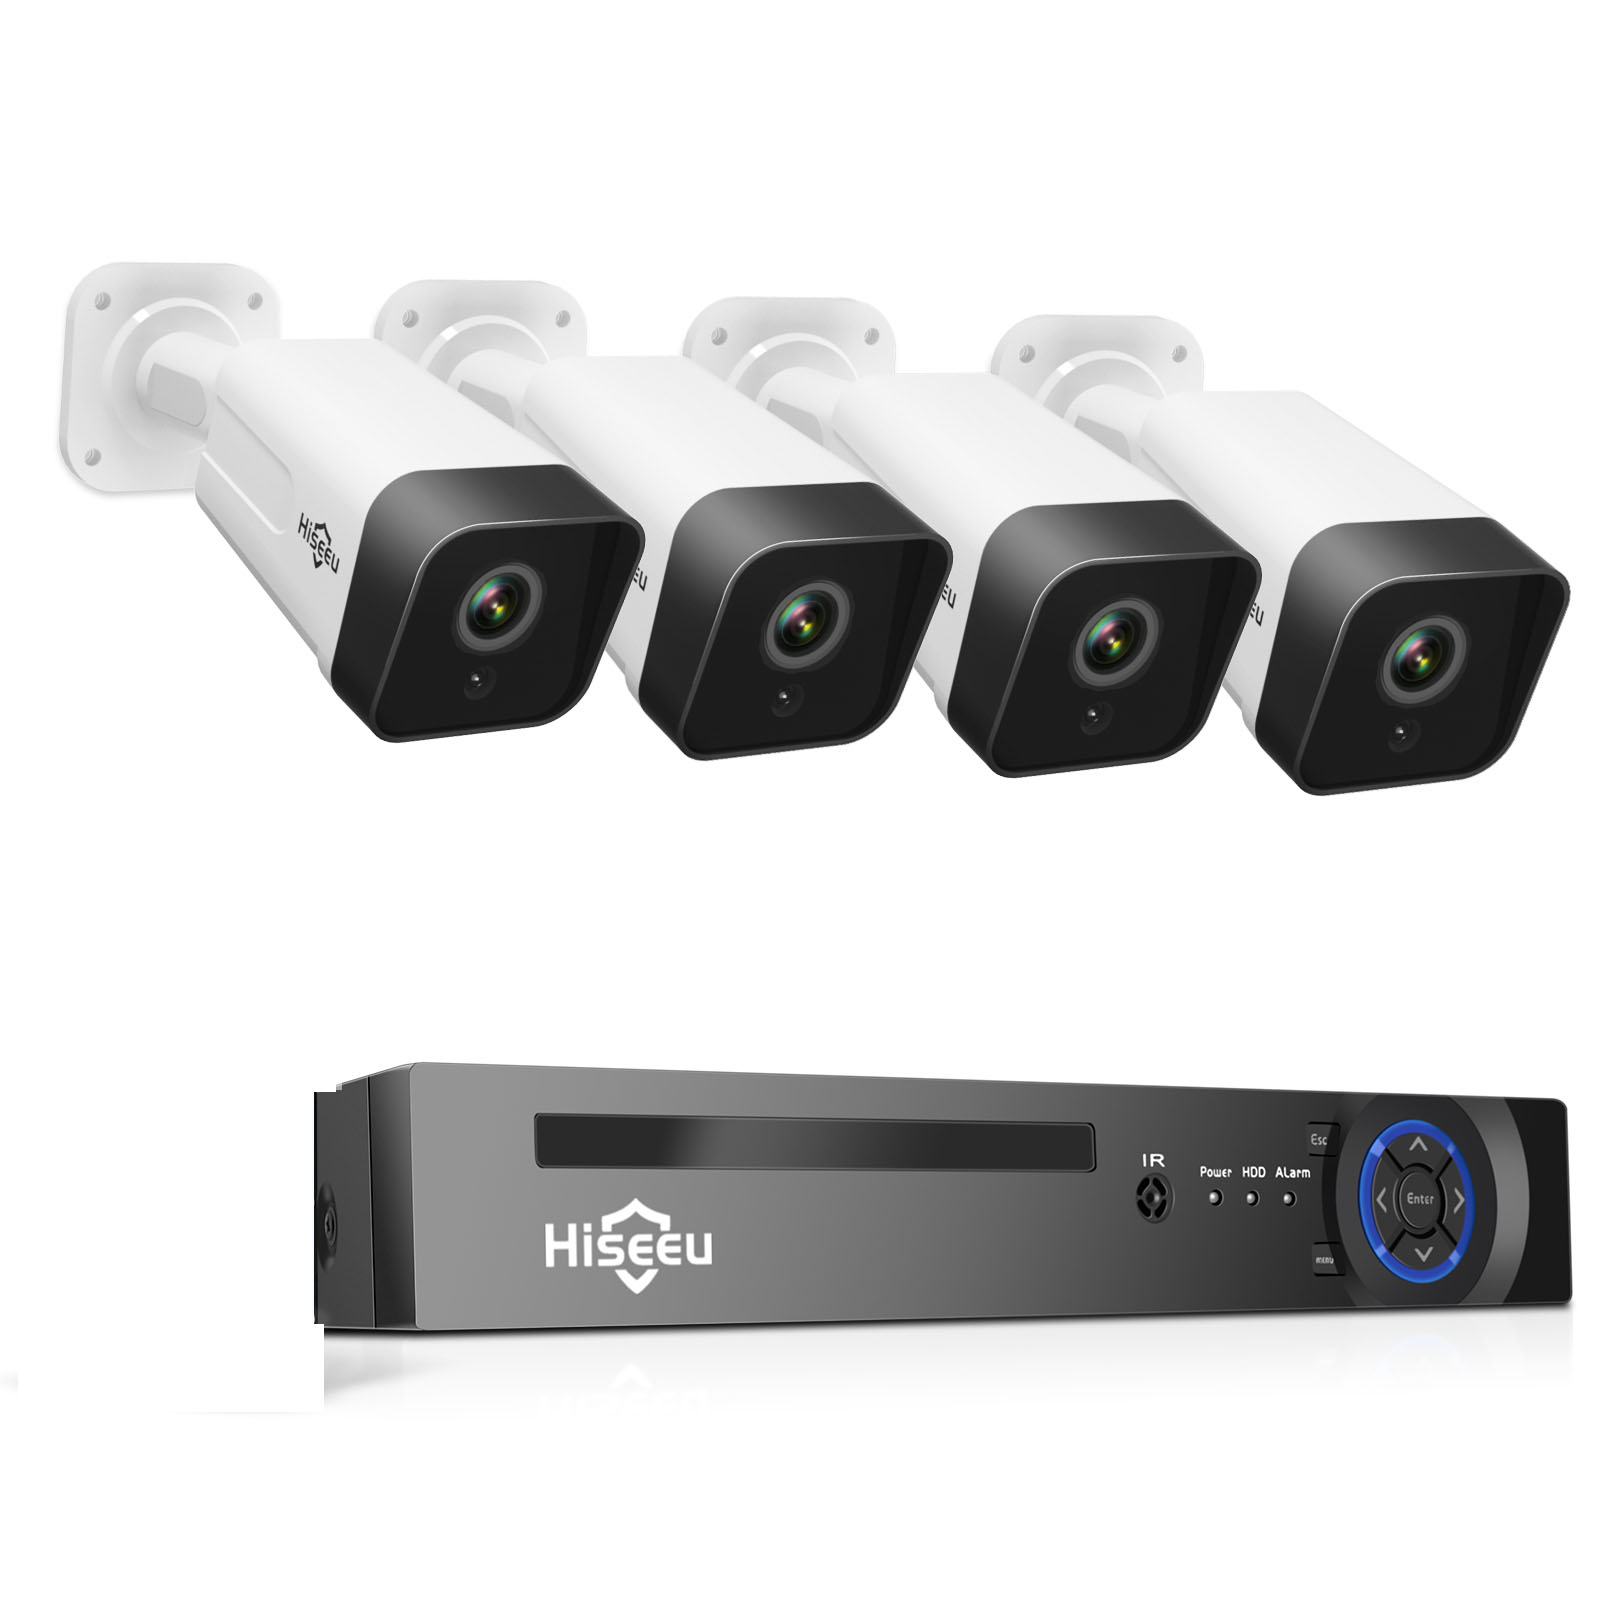 Hiseeu-4Pcs-POE-H265-Security-IP-Cameras-8CH-5MP-NVR-Camera-System-Support-Audio-Night-Vision-10m--I-1580228-1